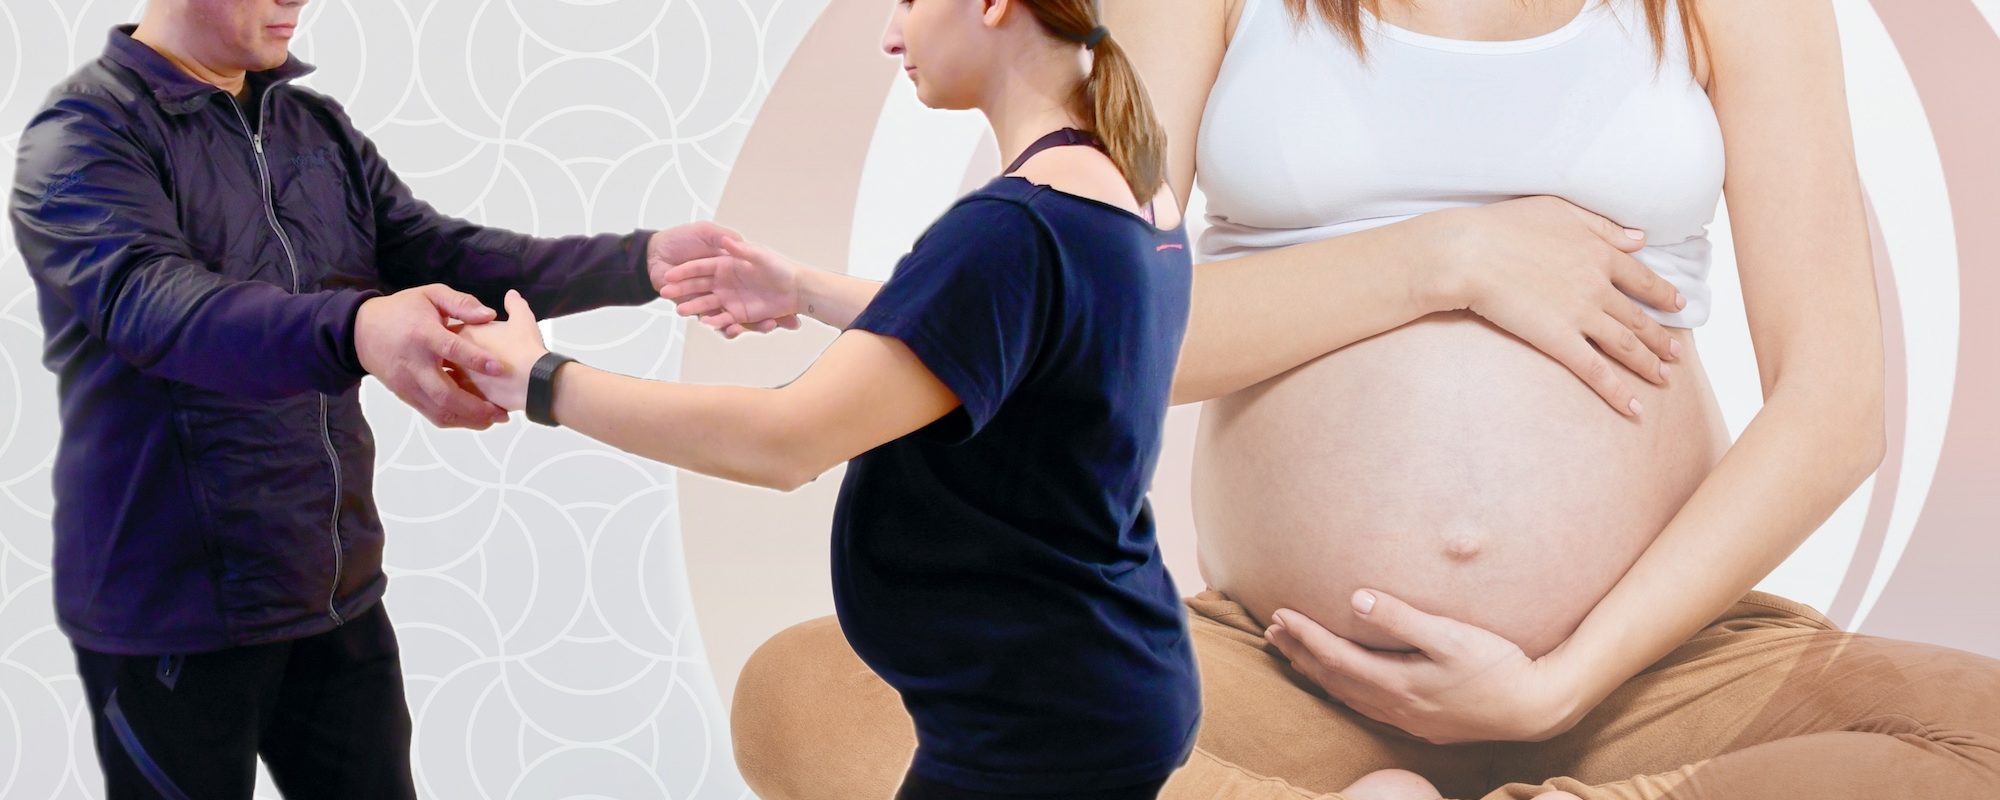 Tai Chi while Pregnant: What are the benefits?